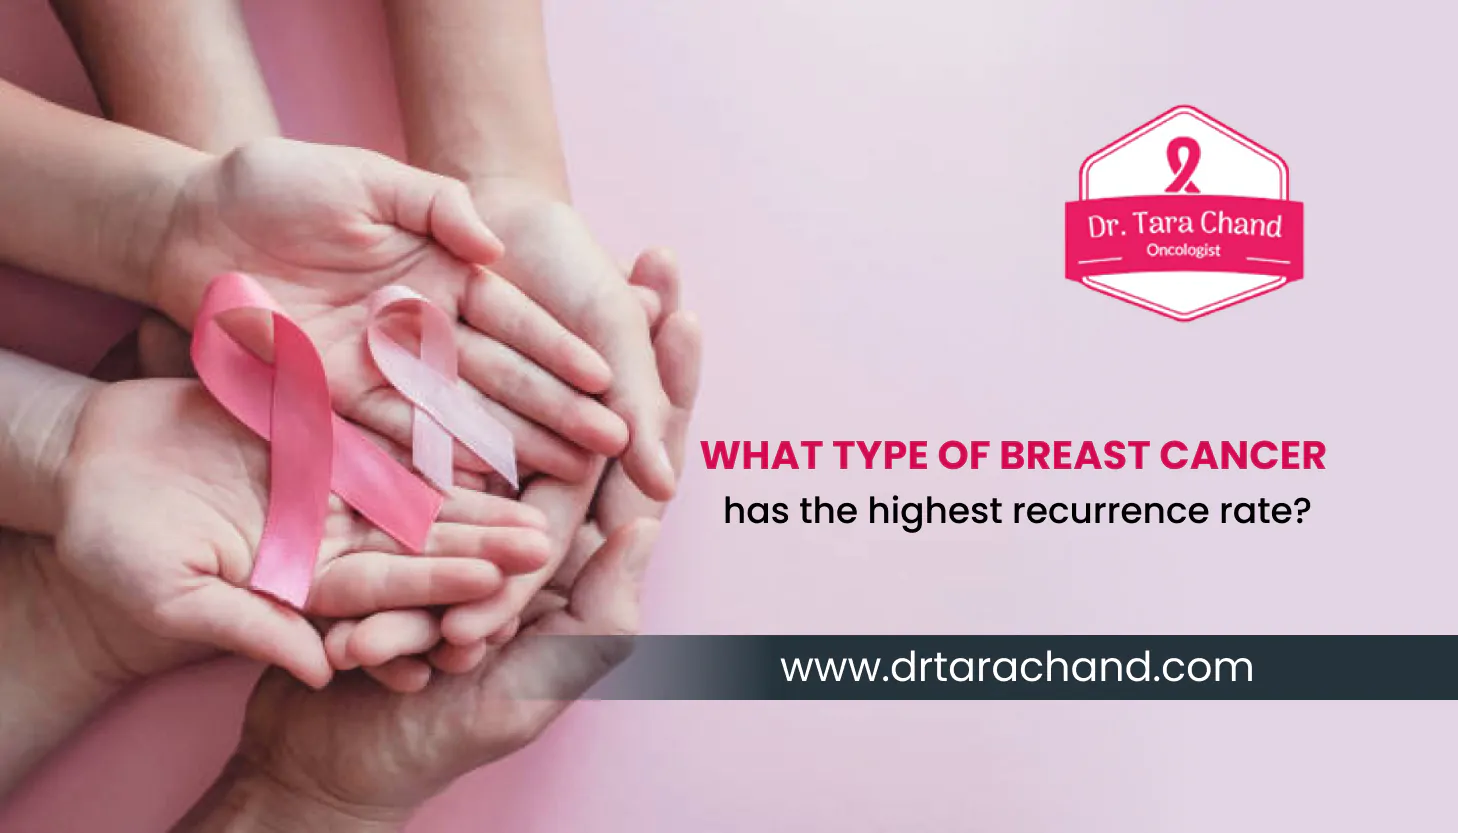 What type of breast cancer has the highest recurrence rate?